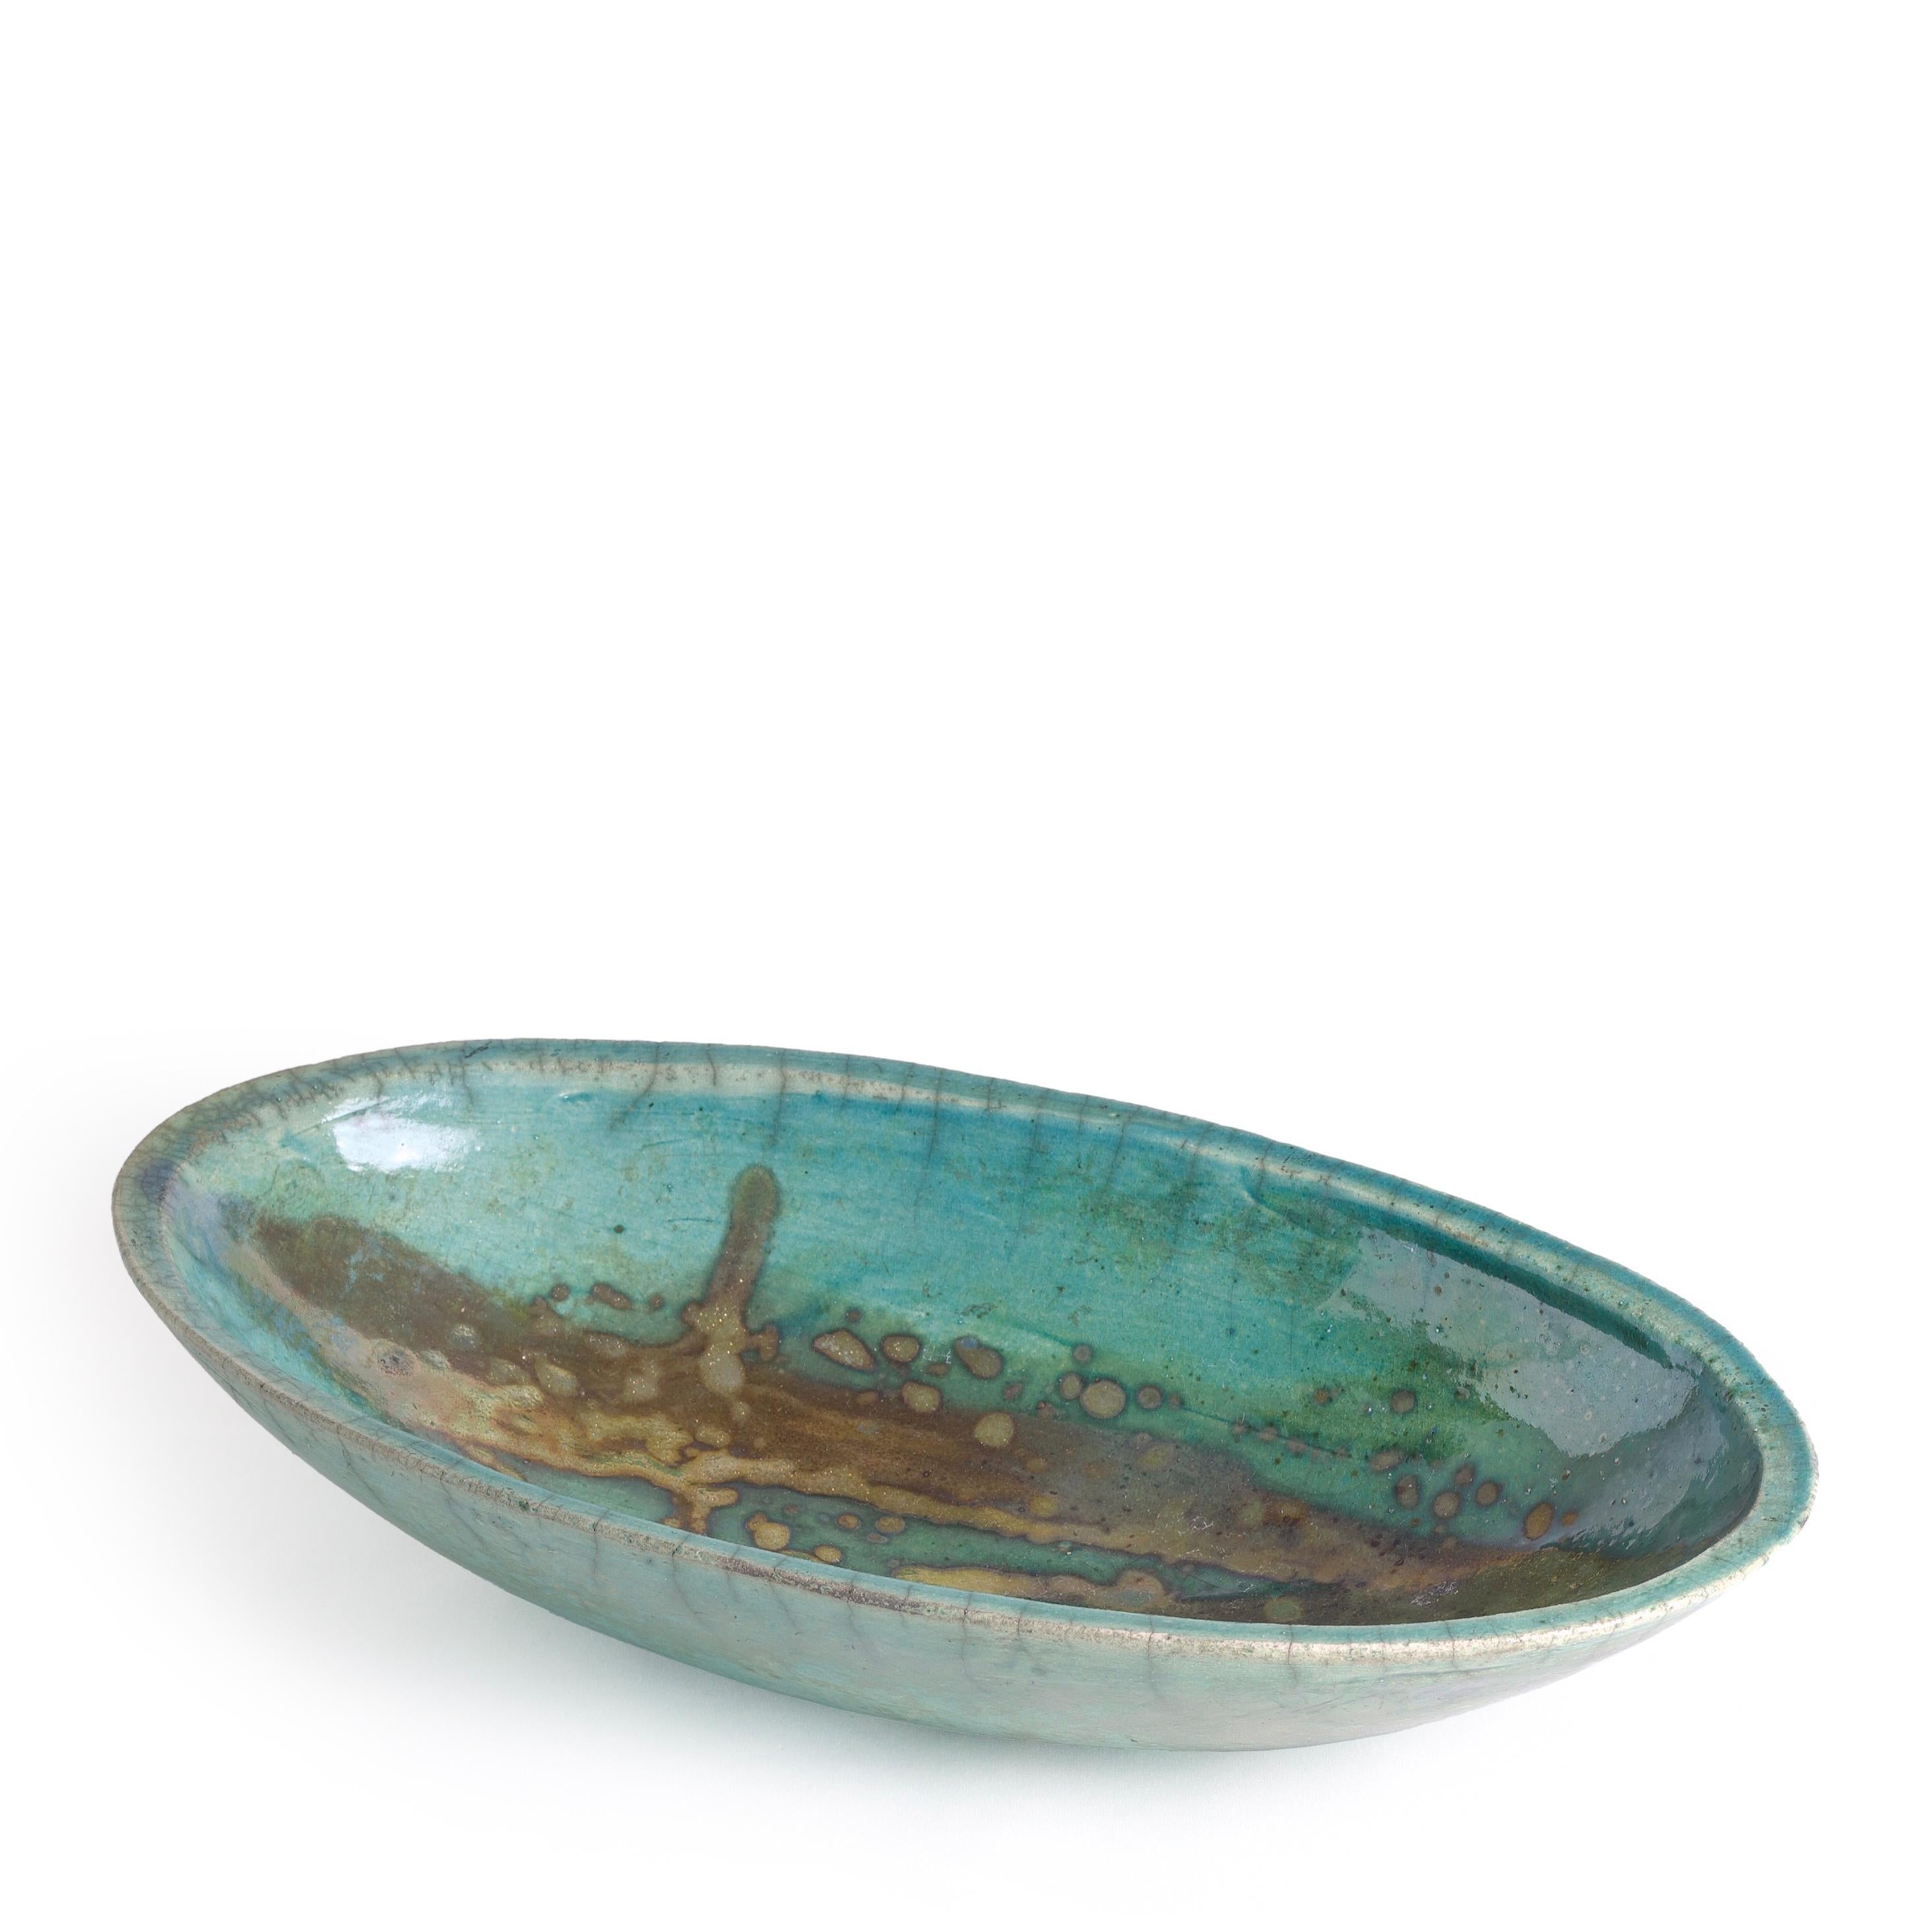 Japanese Modern Long Bowl Raku Ceramic Green Copper In New Condition For Sale In monza, Monza and Brianza